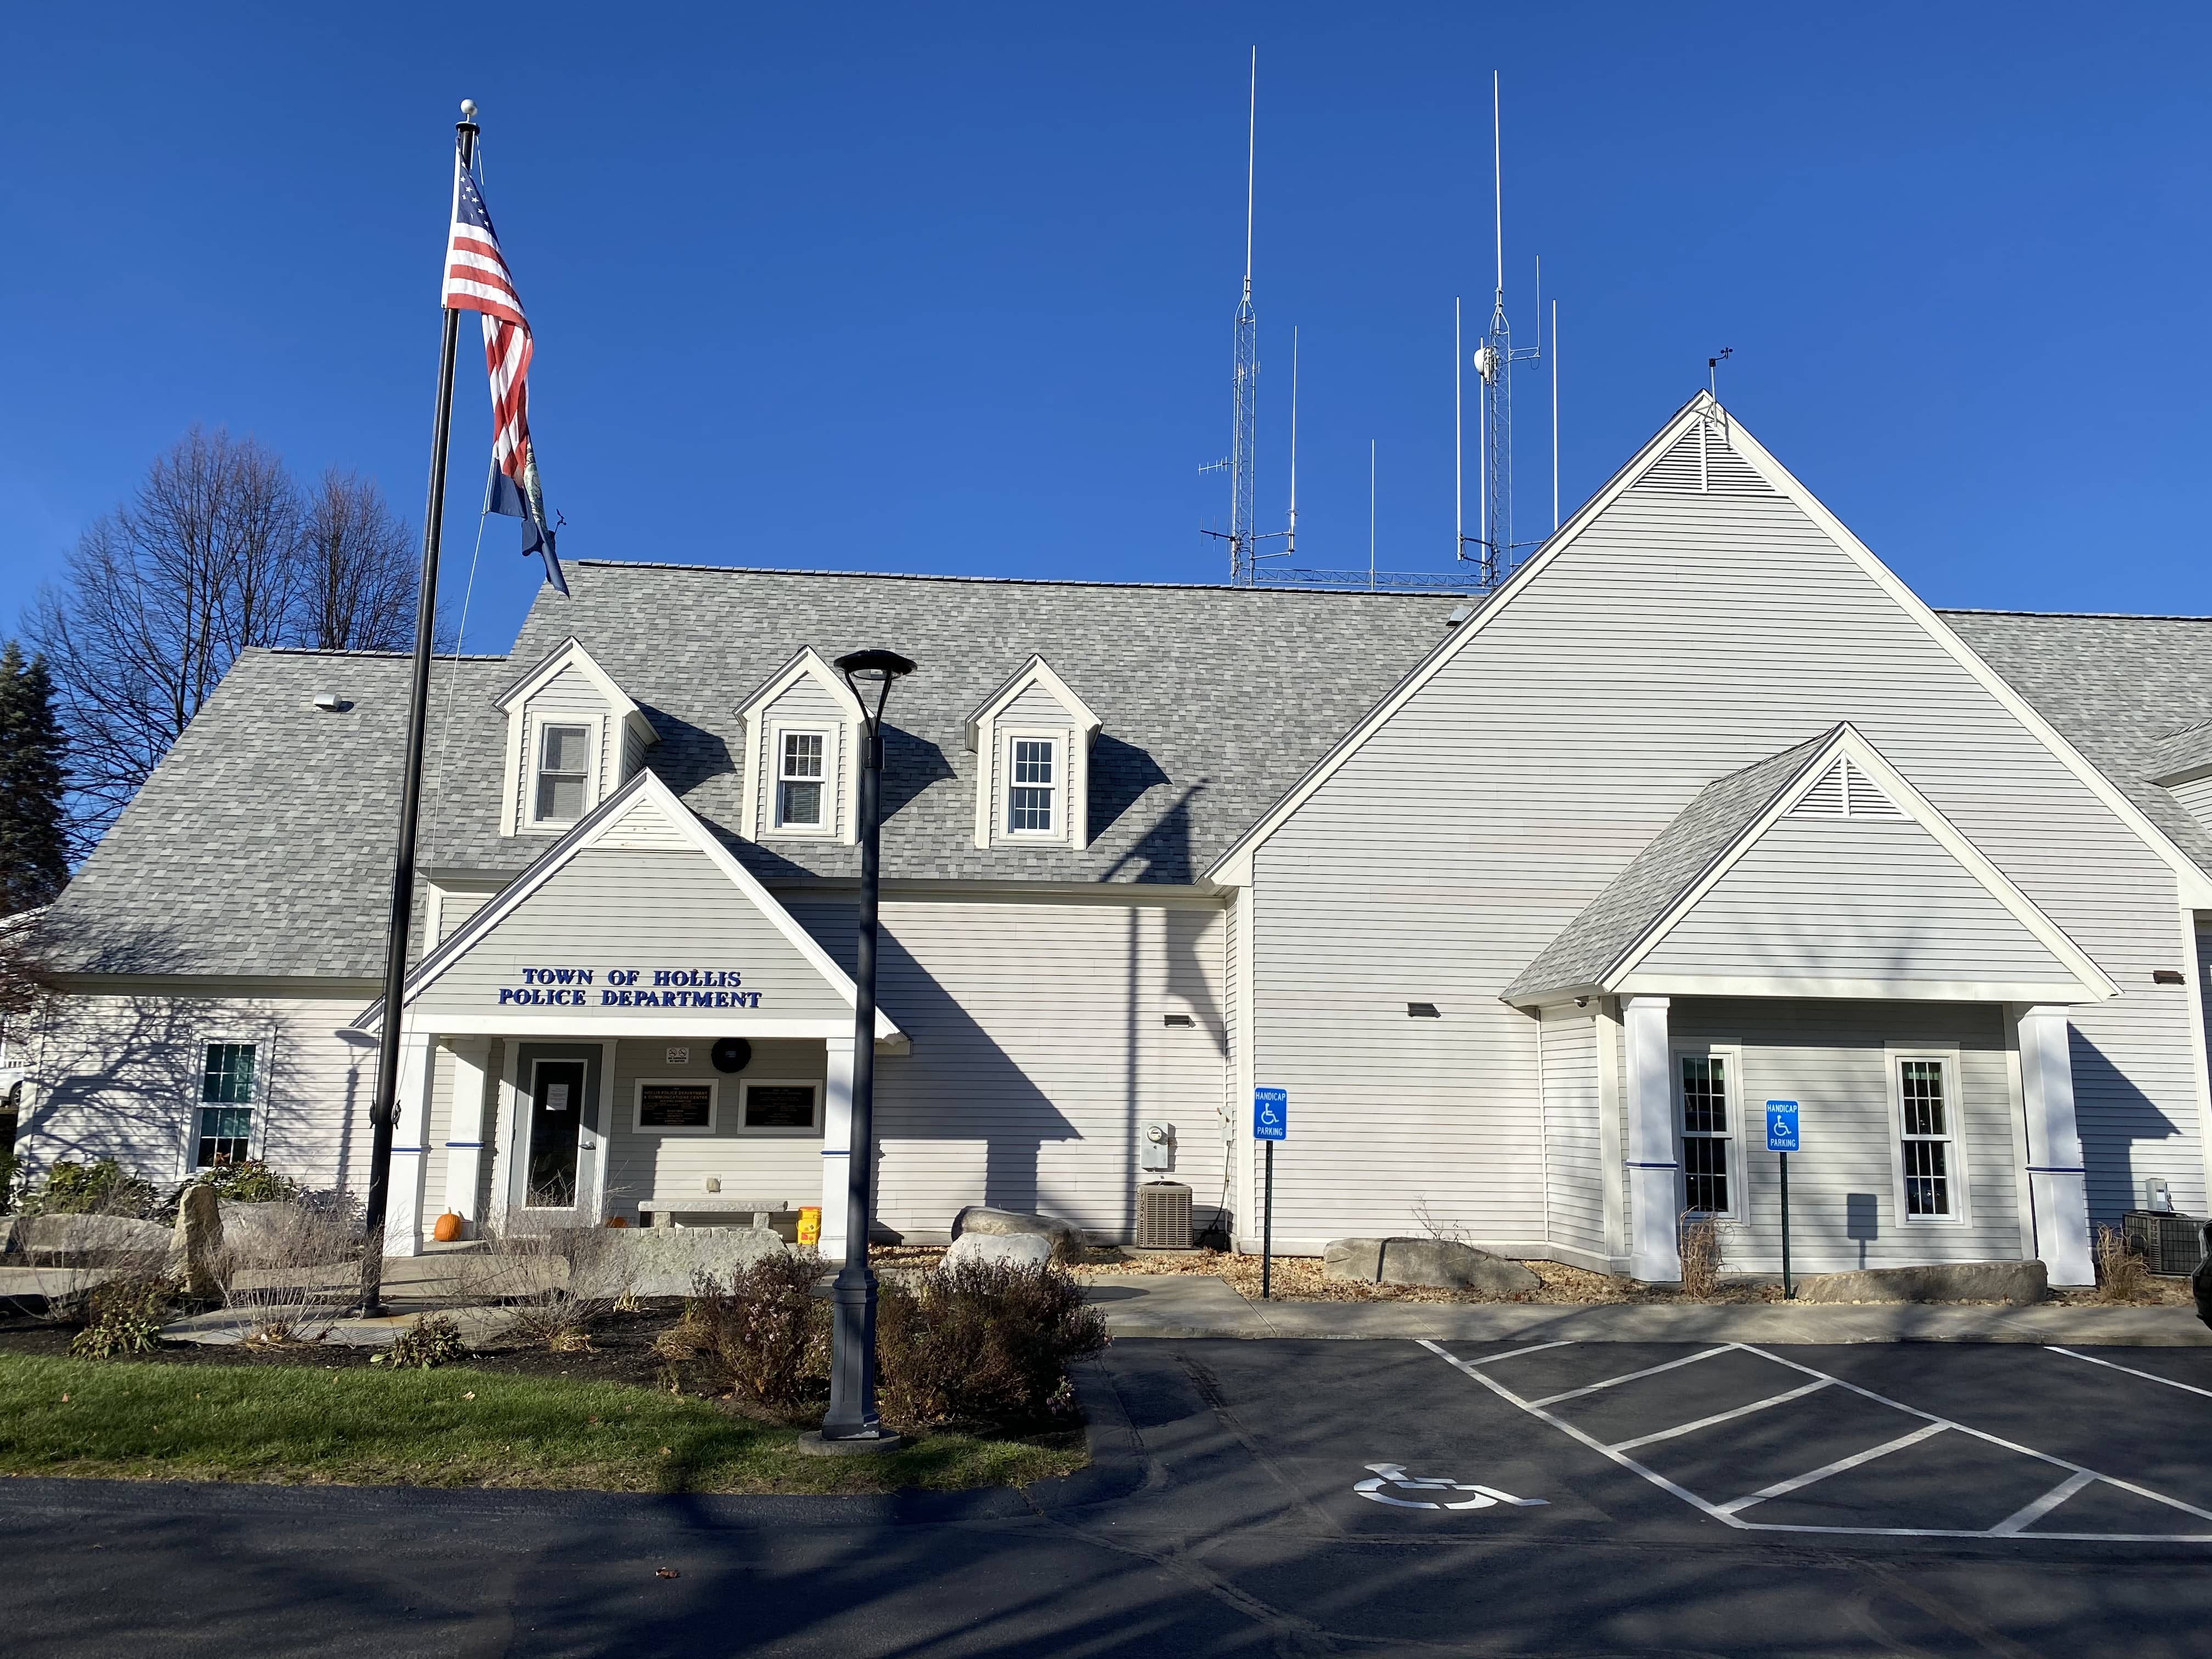 Image of Town of Hollis Police Department